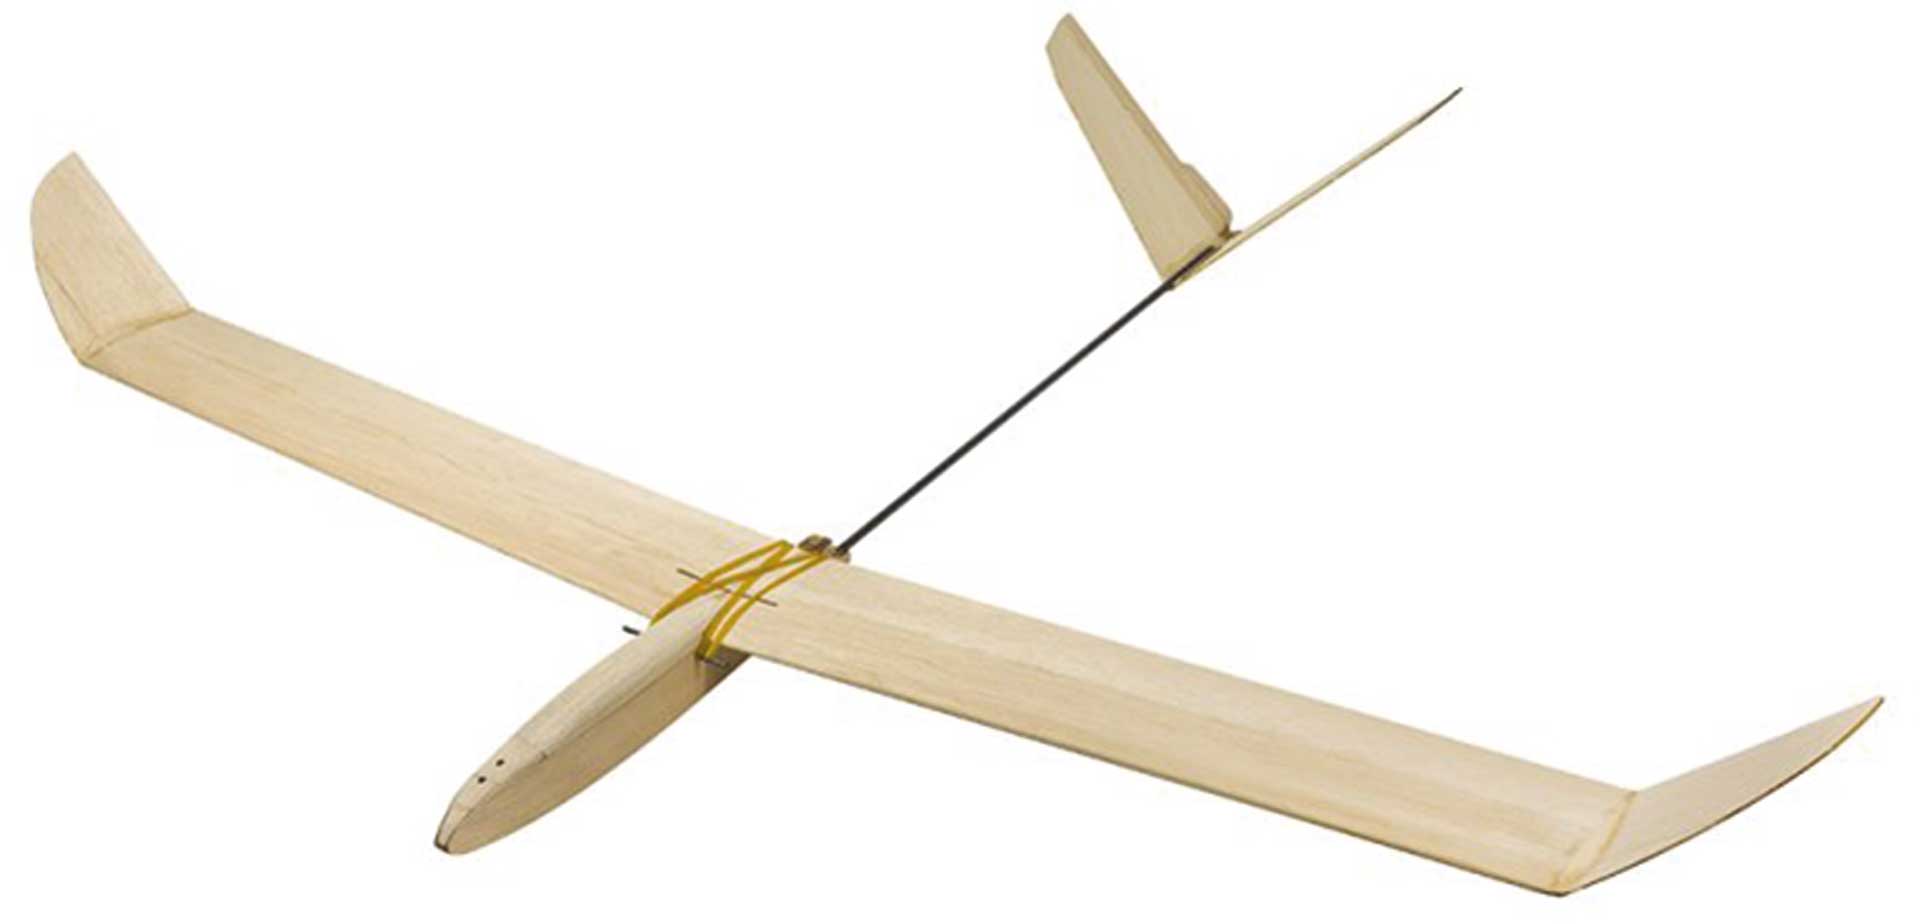 S&S Worldwide Balsa-Wood Top Gun Glider Model Assemble Planes And Decorate  With Paints Or Perfect For Field Days, Summer Camps, STEM | m.seredonline.sk